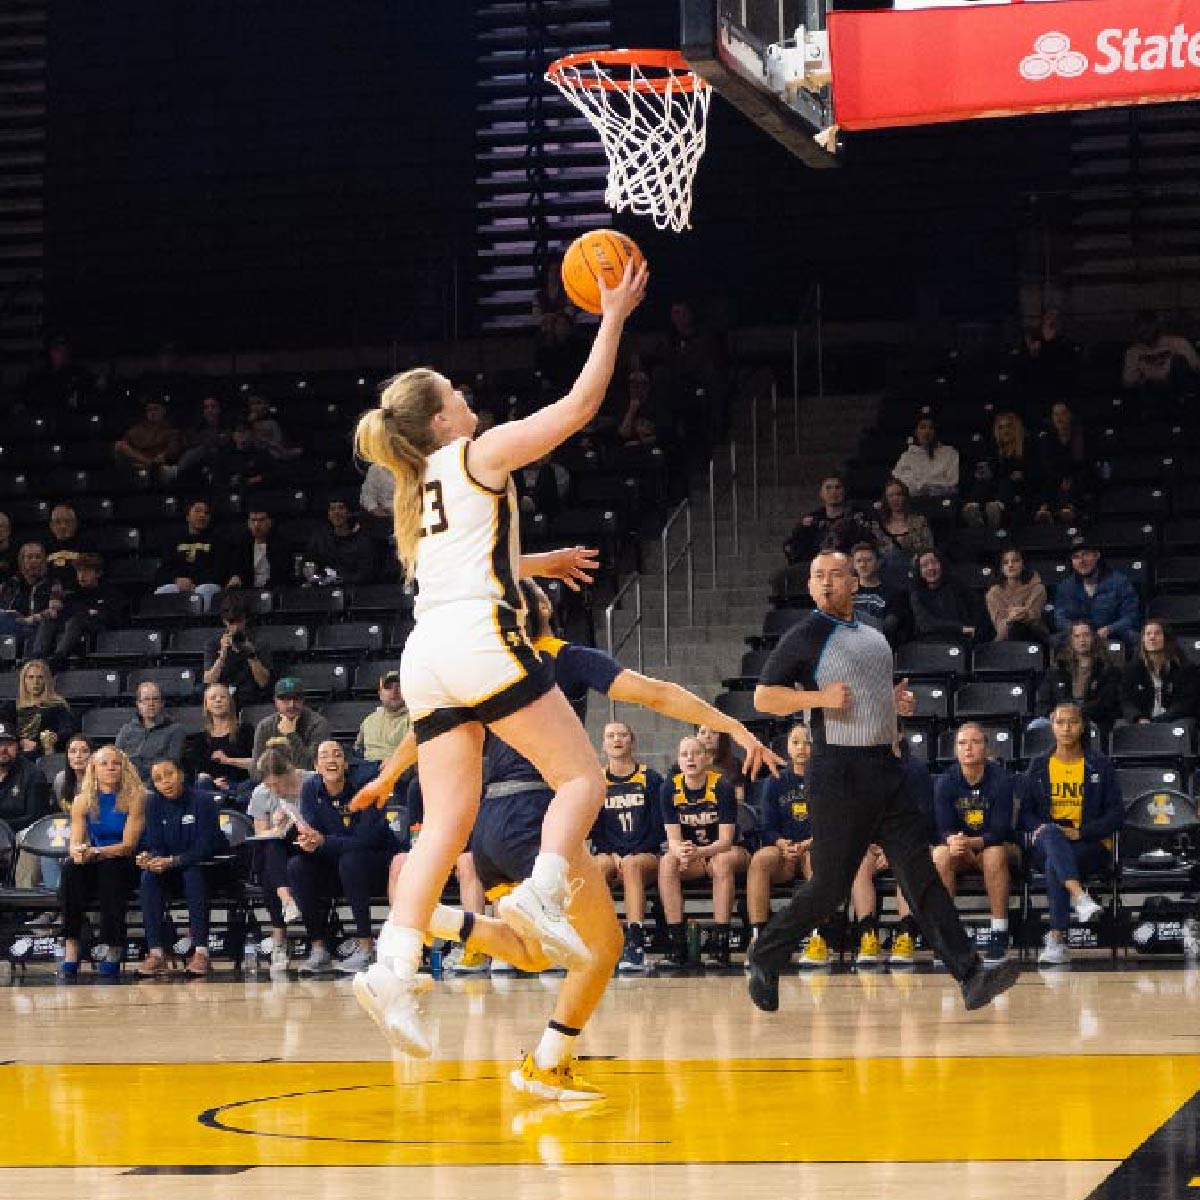 A U of I women's basketball team member jumping to make a basket during a home game in the ICCU arena